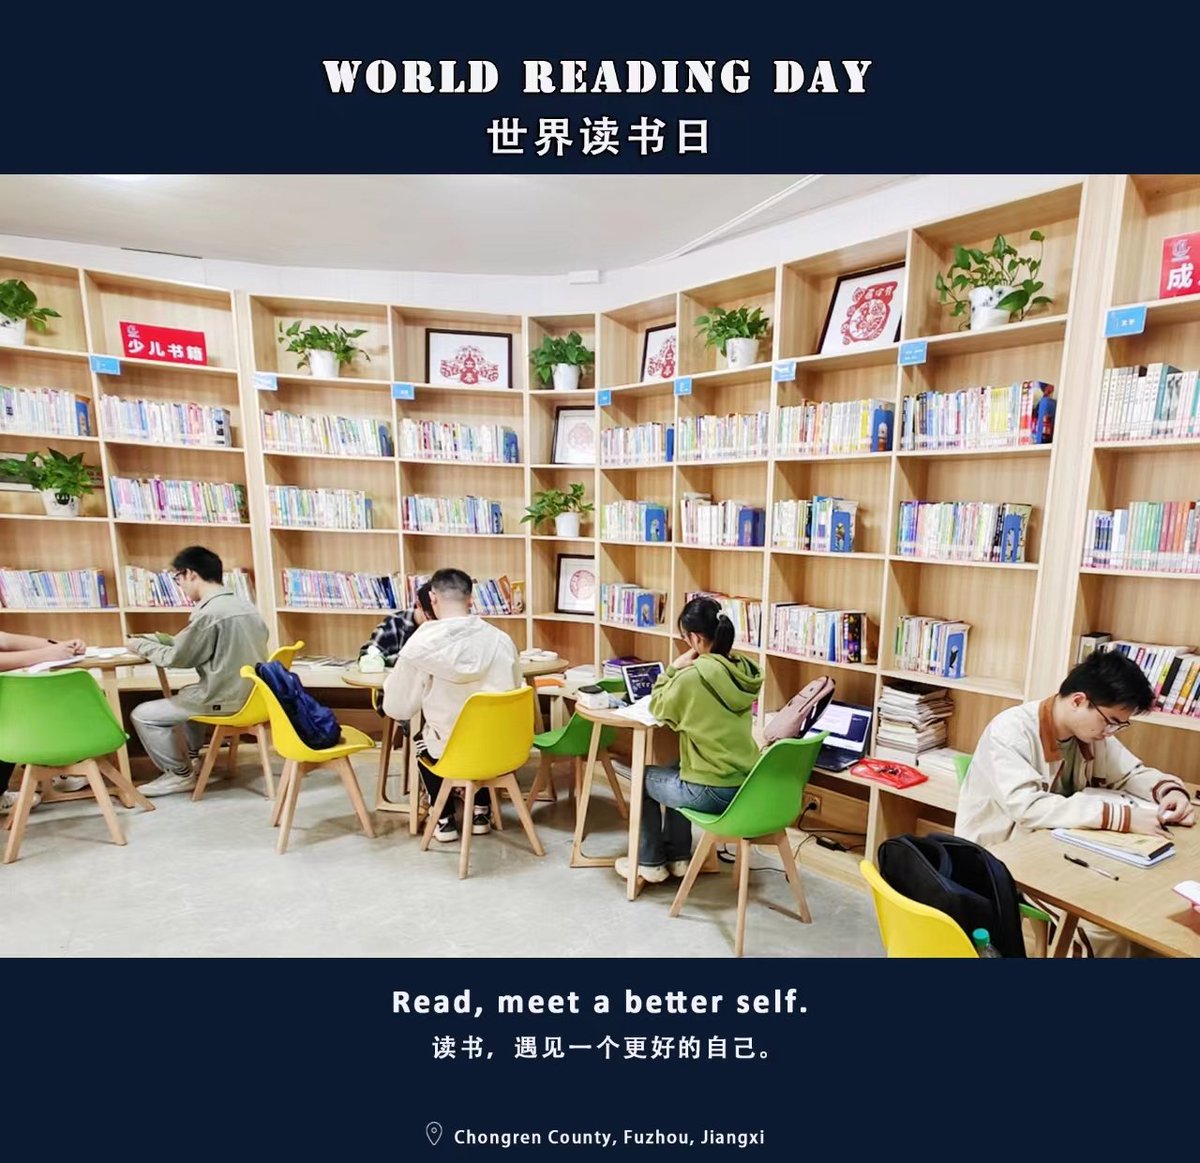 Chongren County, Fuzhou City, Jiangxi Province, has carried out a variety of reading activities, so that reading light up people's lives, so that books moisten people's hearts.#GreenJiangxi #Jiangxi #文化抚州梦想之舟 #文化赣鄱